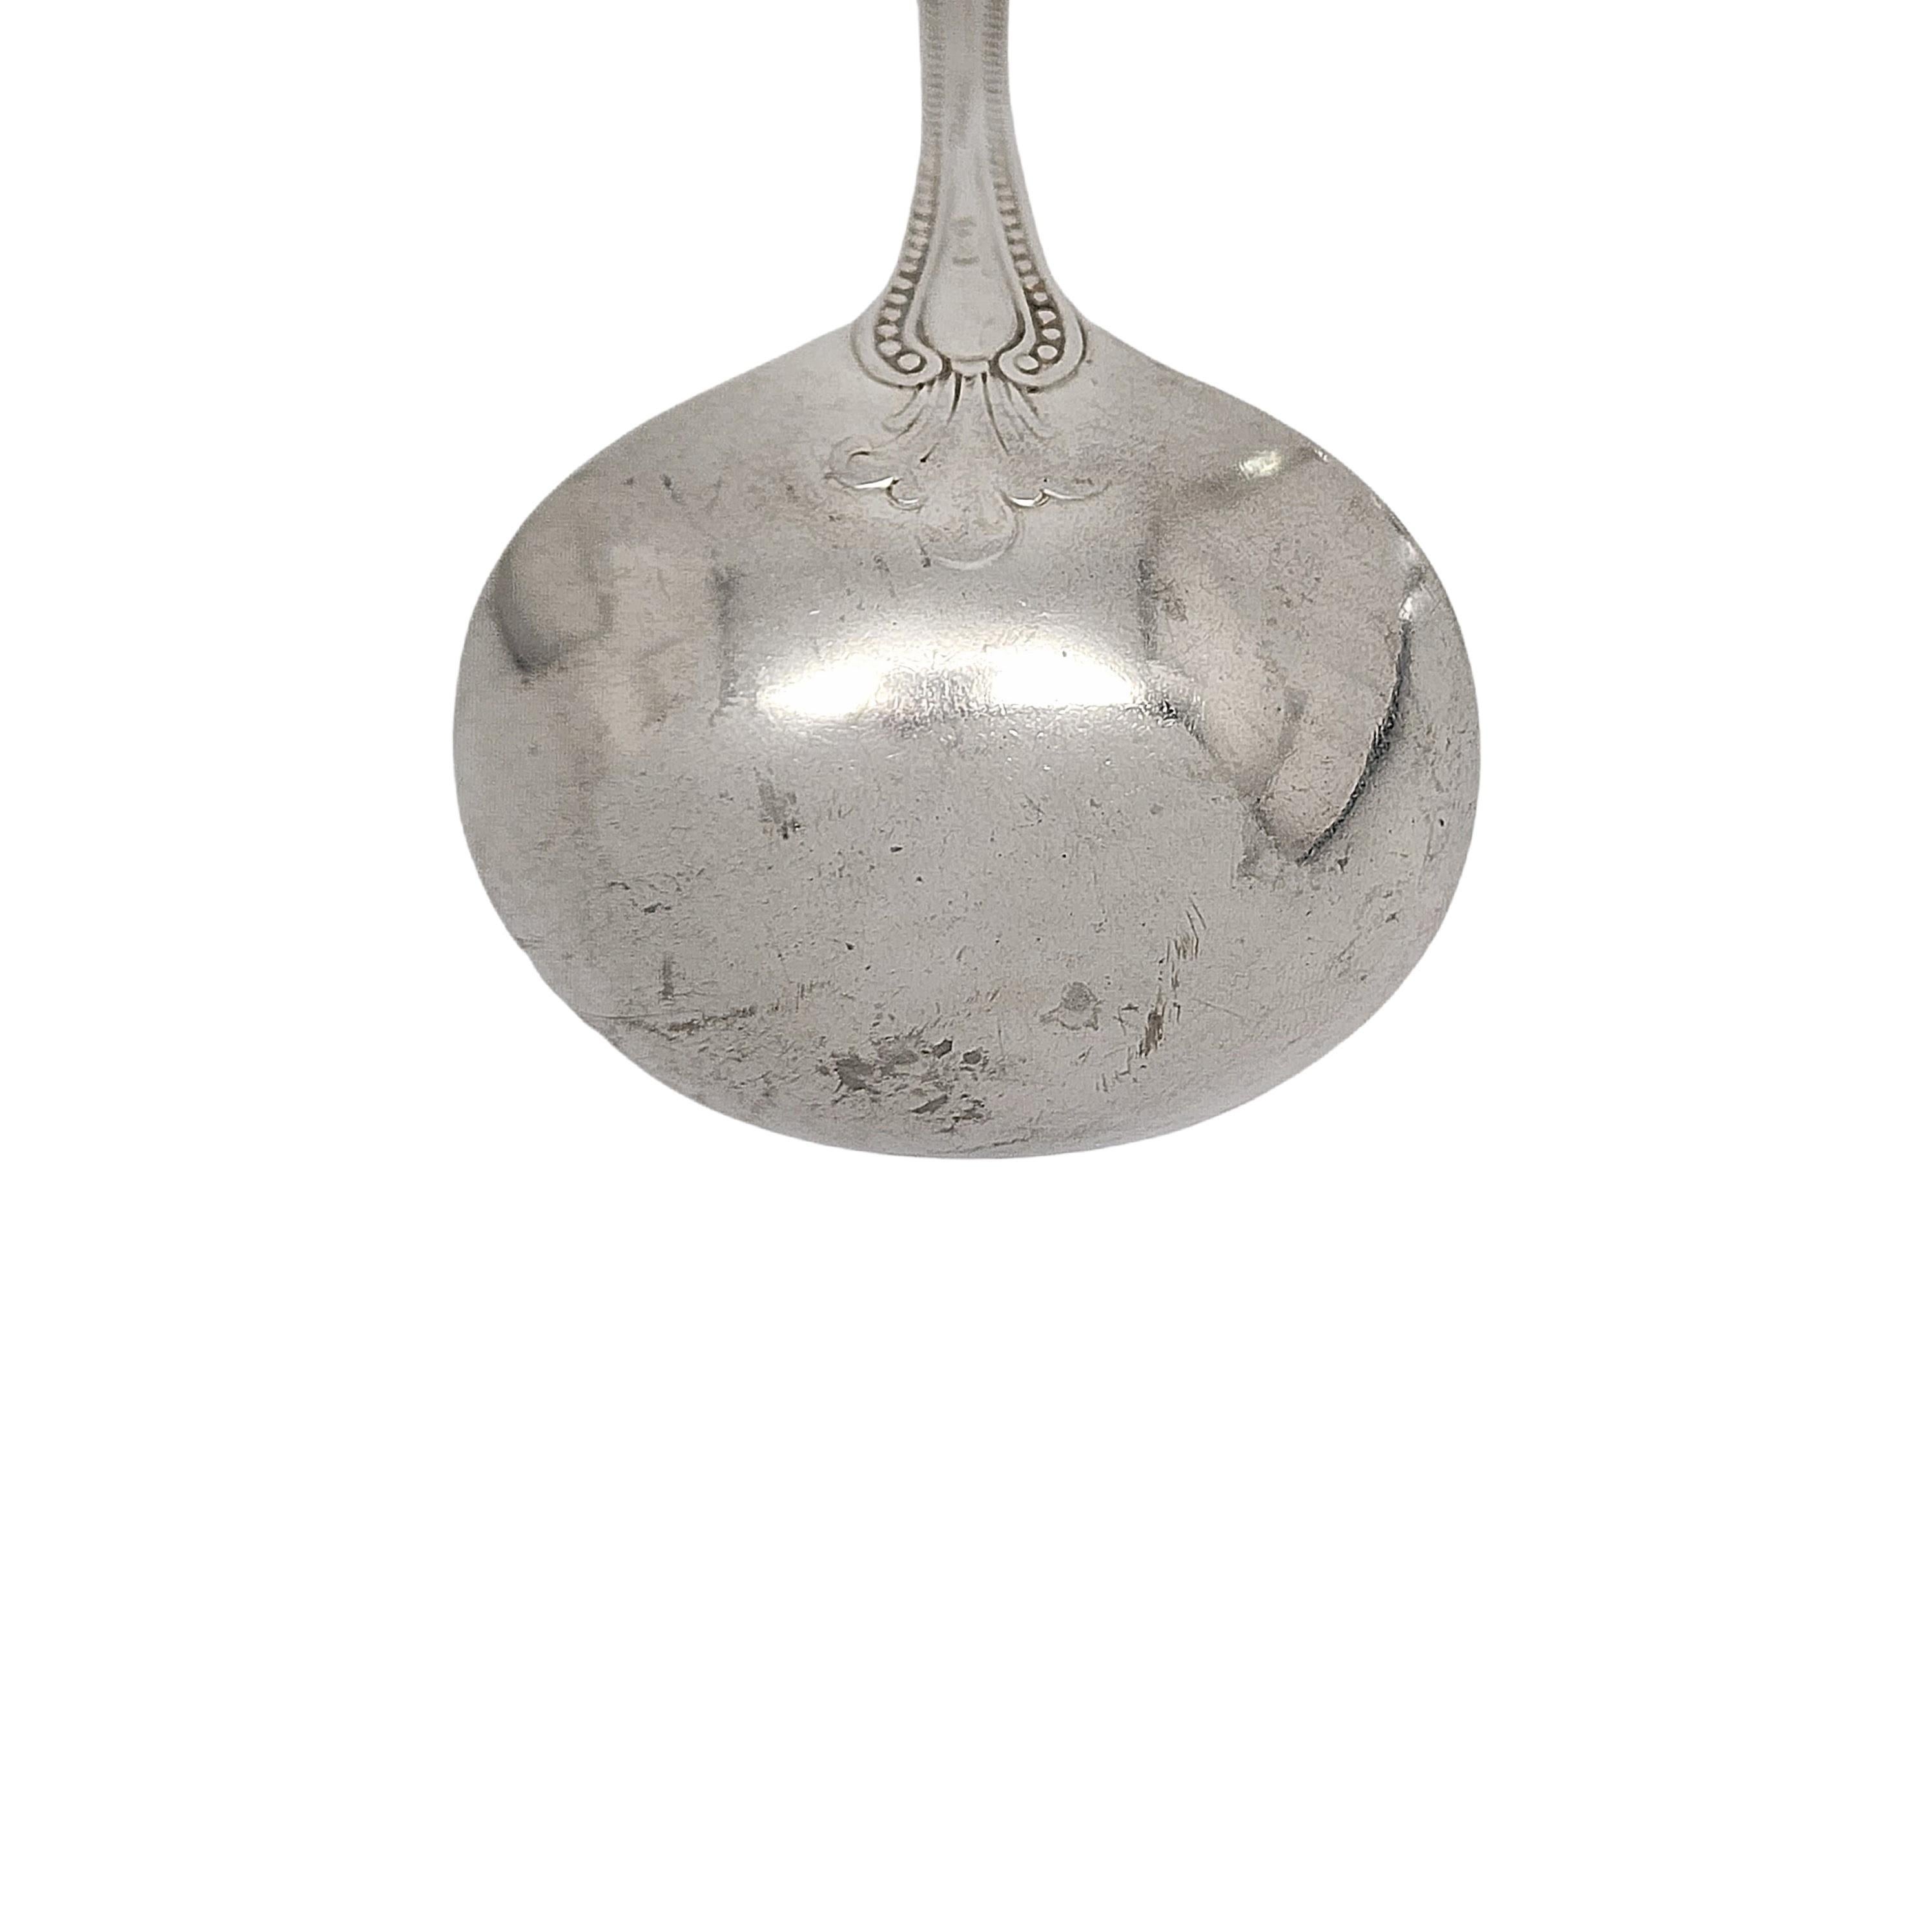 John Polhamus for Tiffany & Co Sterling Silver Bead Ladle with Monogram For Sale 3